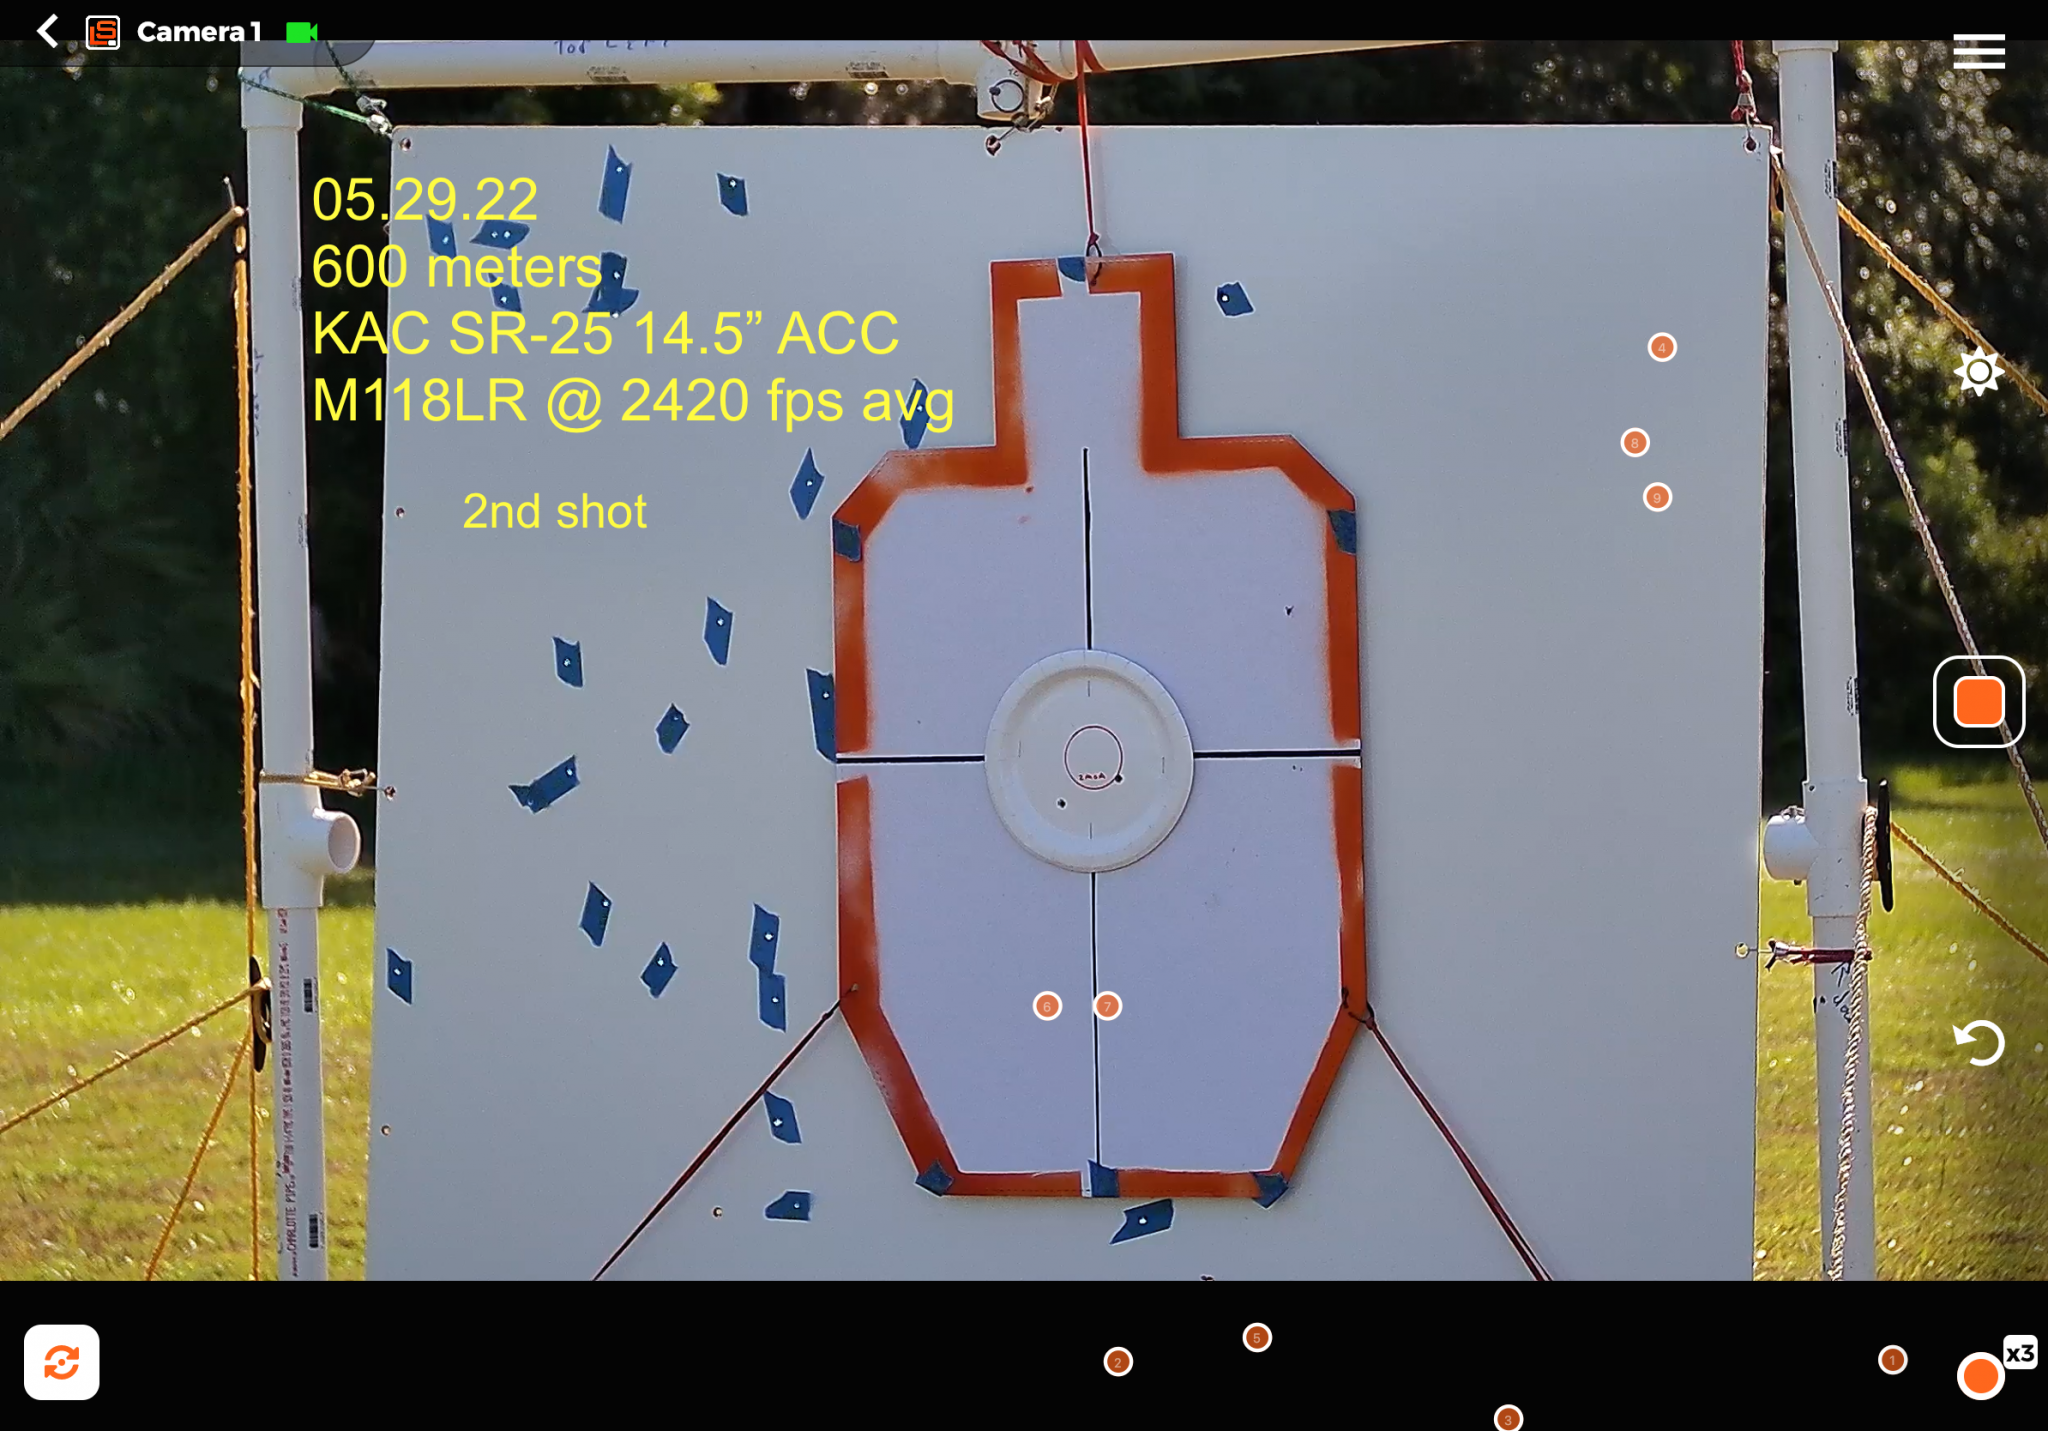 IMG_3225CRACKER SWAMP KAC SR-25 7TH Session 600 Meters First Two Shots 05.29.22 copy.png